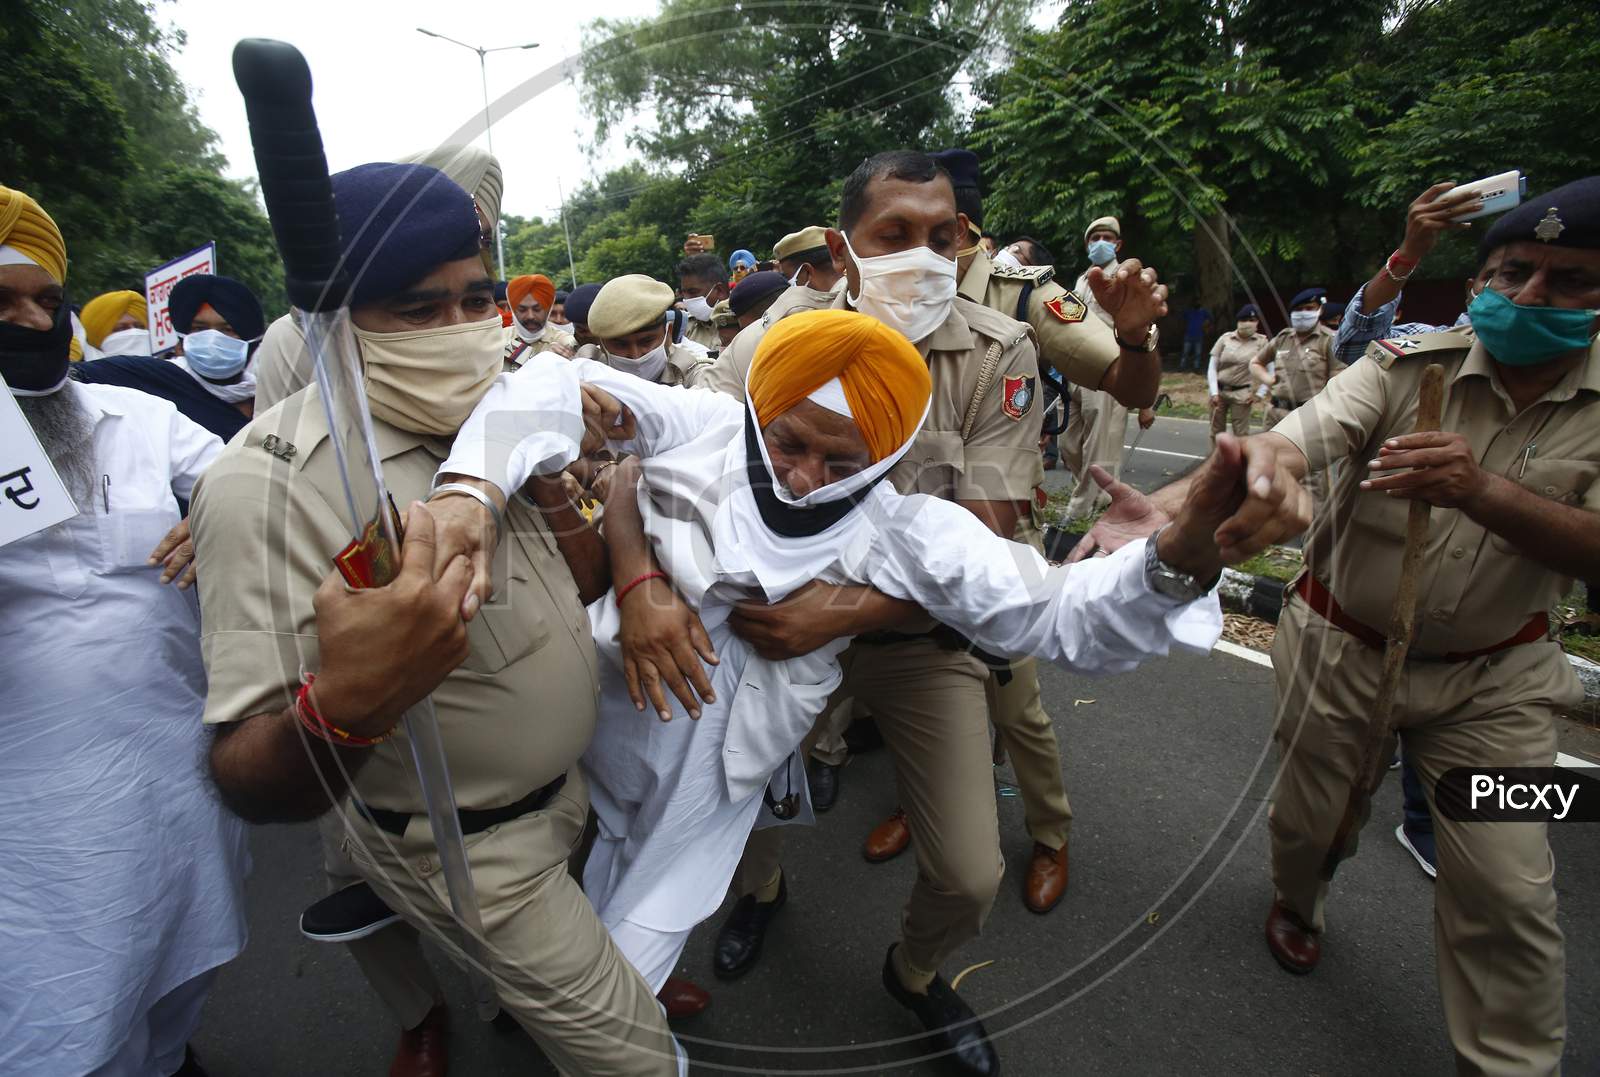 Police arrest to activists of Shiromani Akali Dal (SAD) during a protest against state government near Punjab Governor House in Chandigarh August 9, 2020.